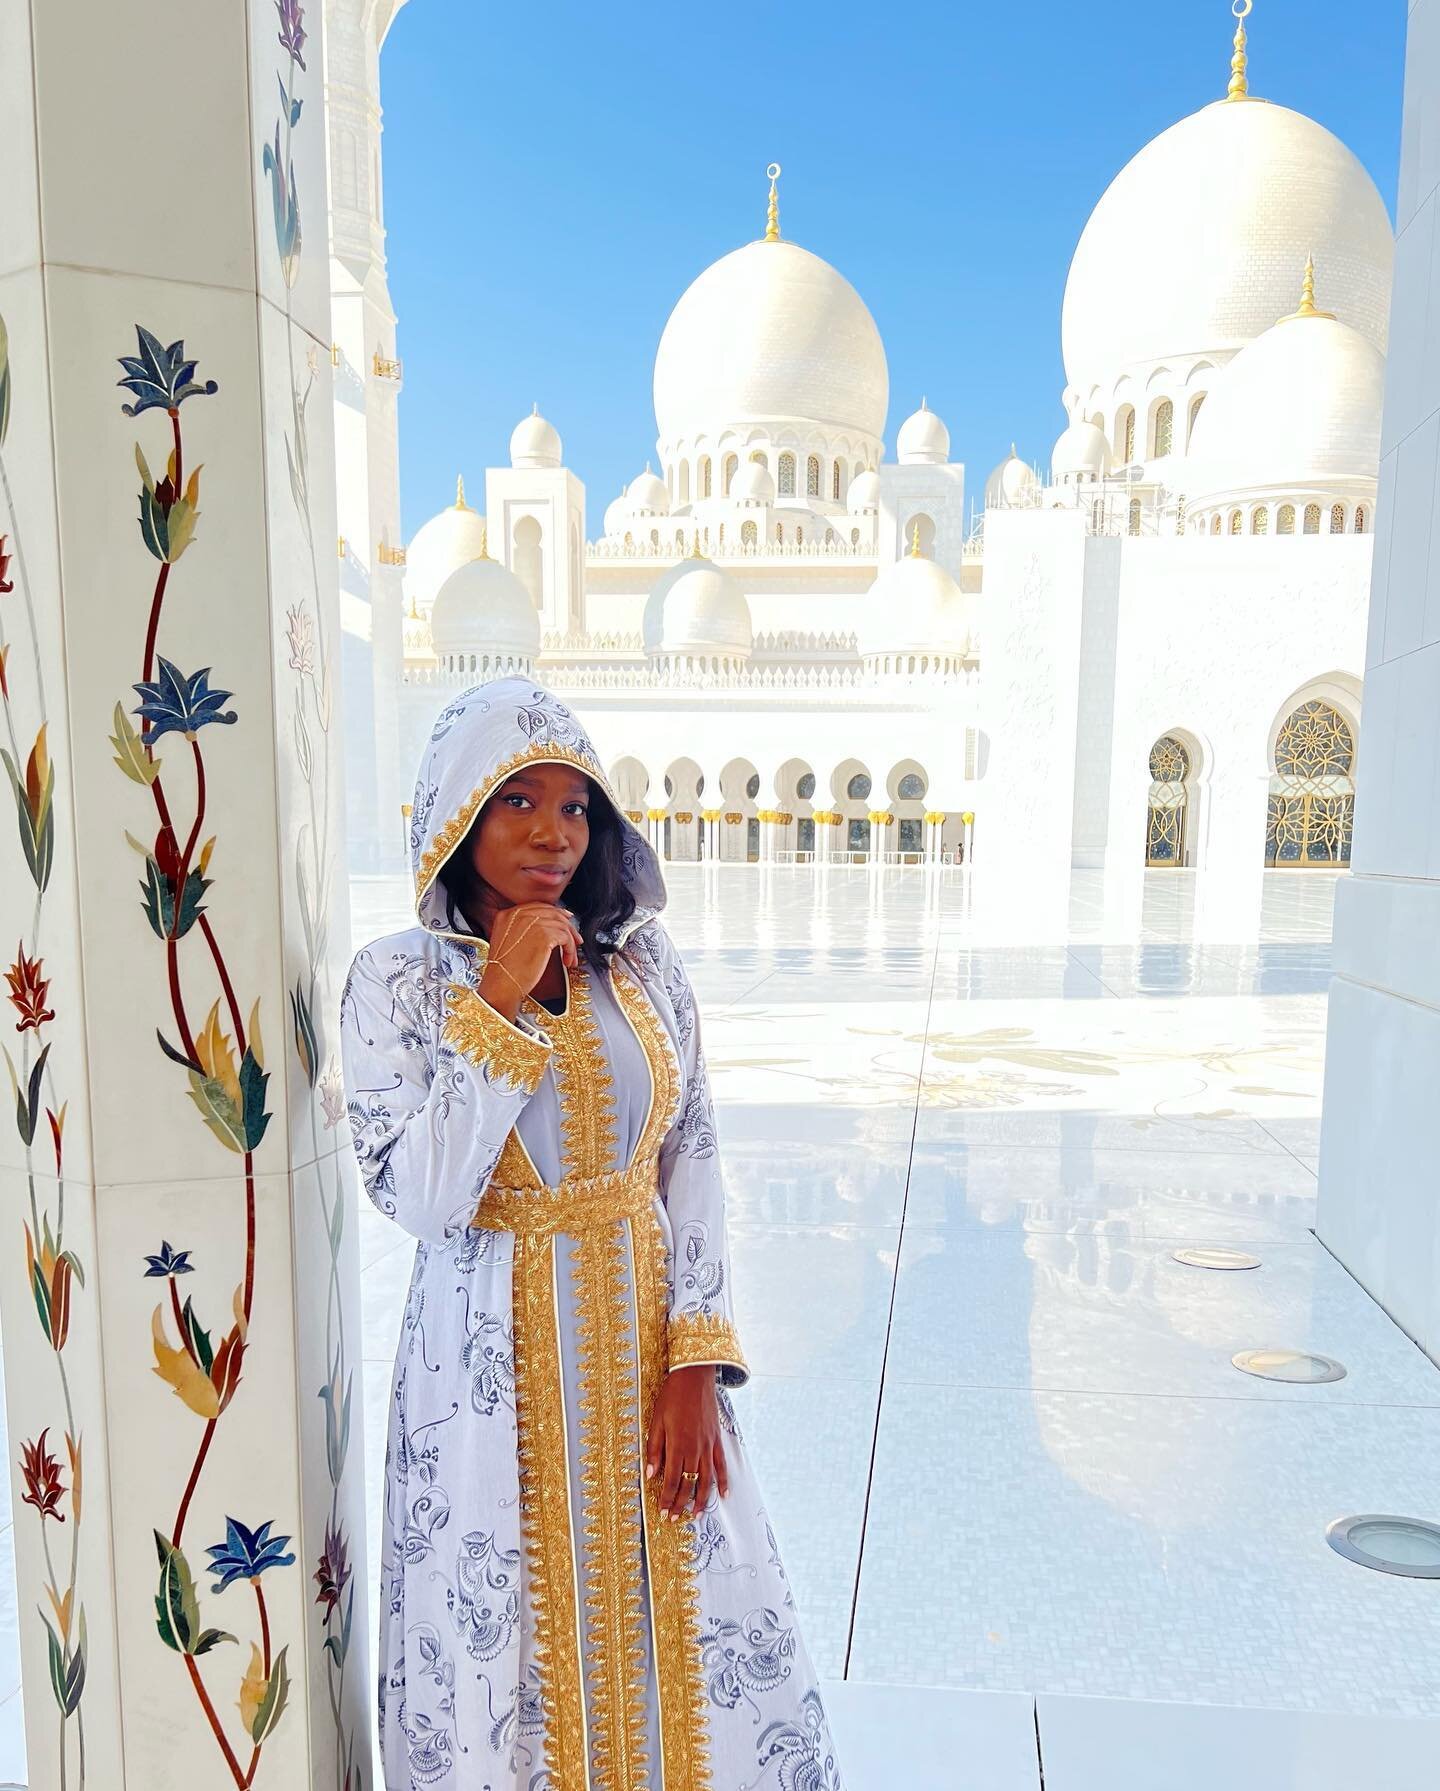 Abu Dhabi left me awestruck 🕌 one of the most incredible trips I&rsquo;ve been on &amp; can&rsquo;t wait to head back to the UAE soon! ✨ 🌙